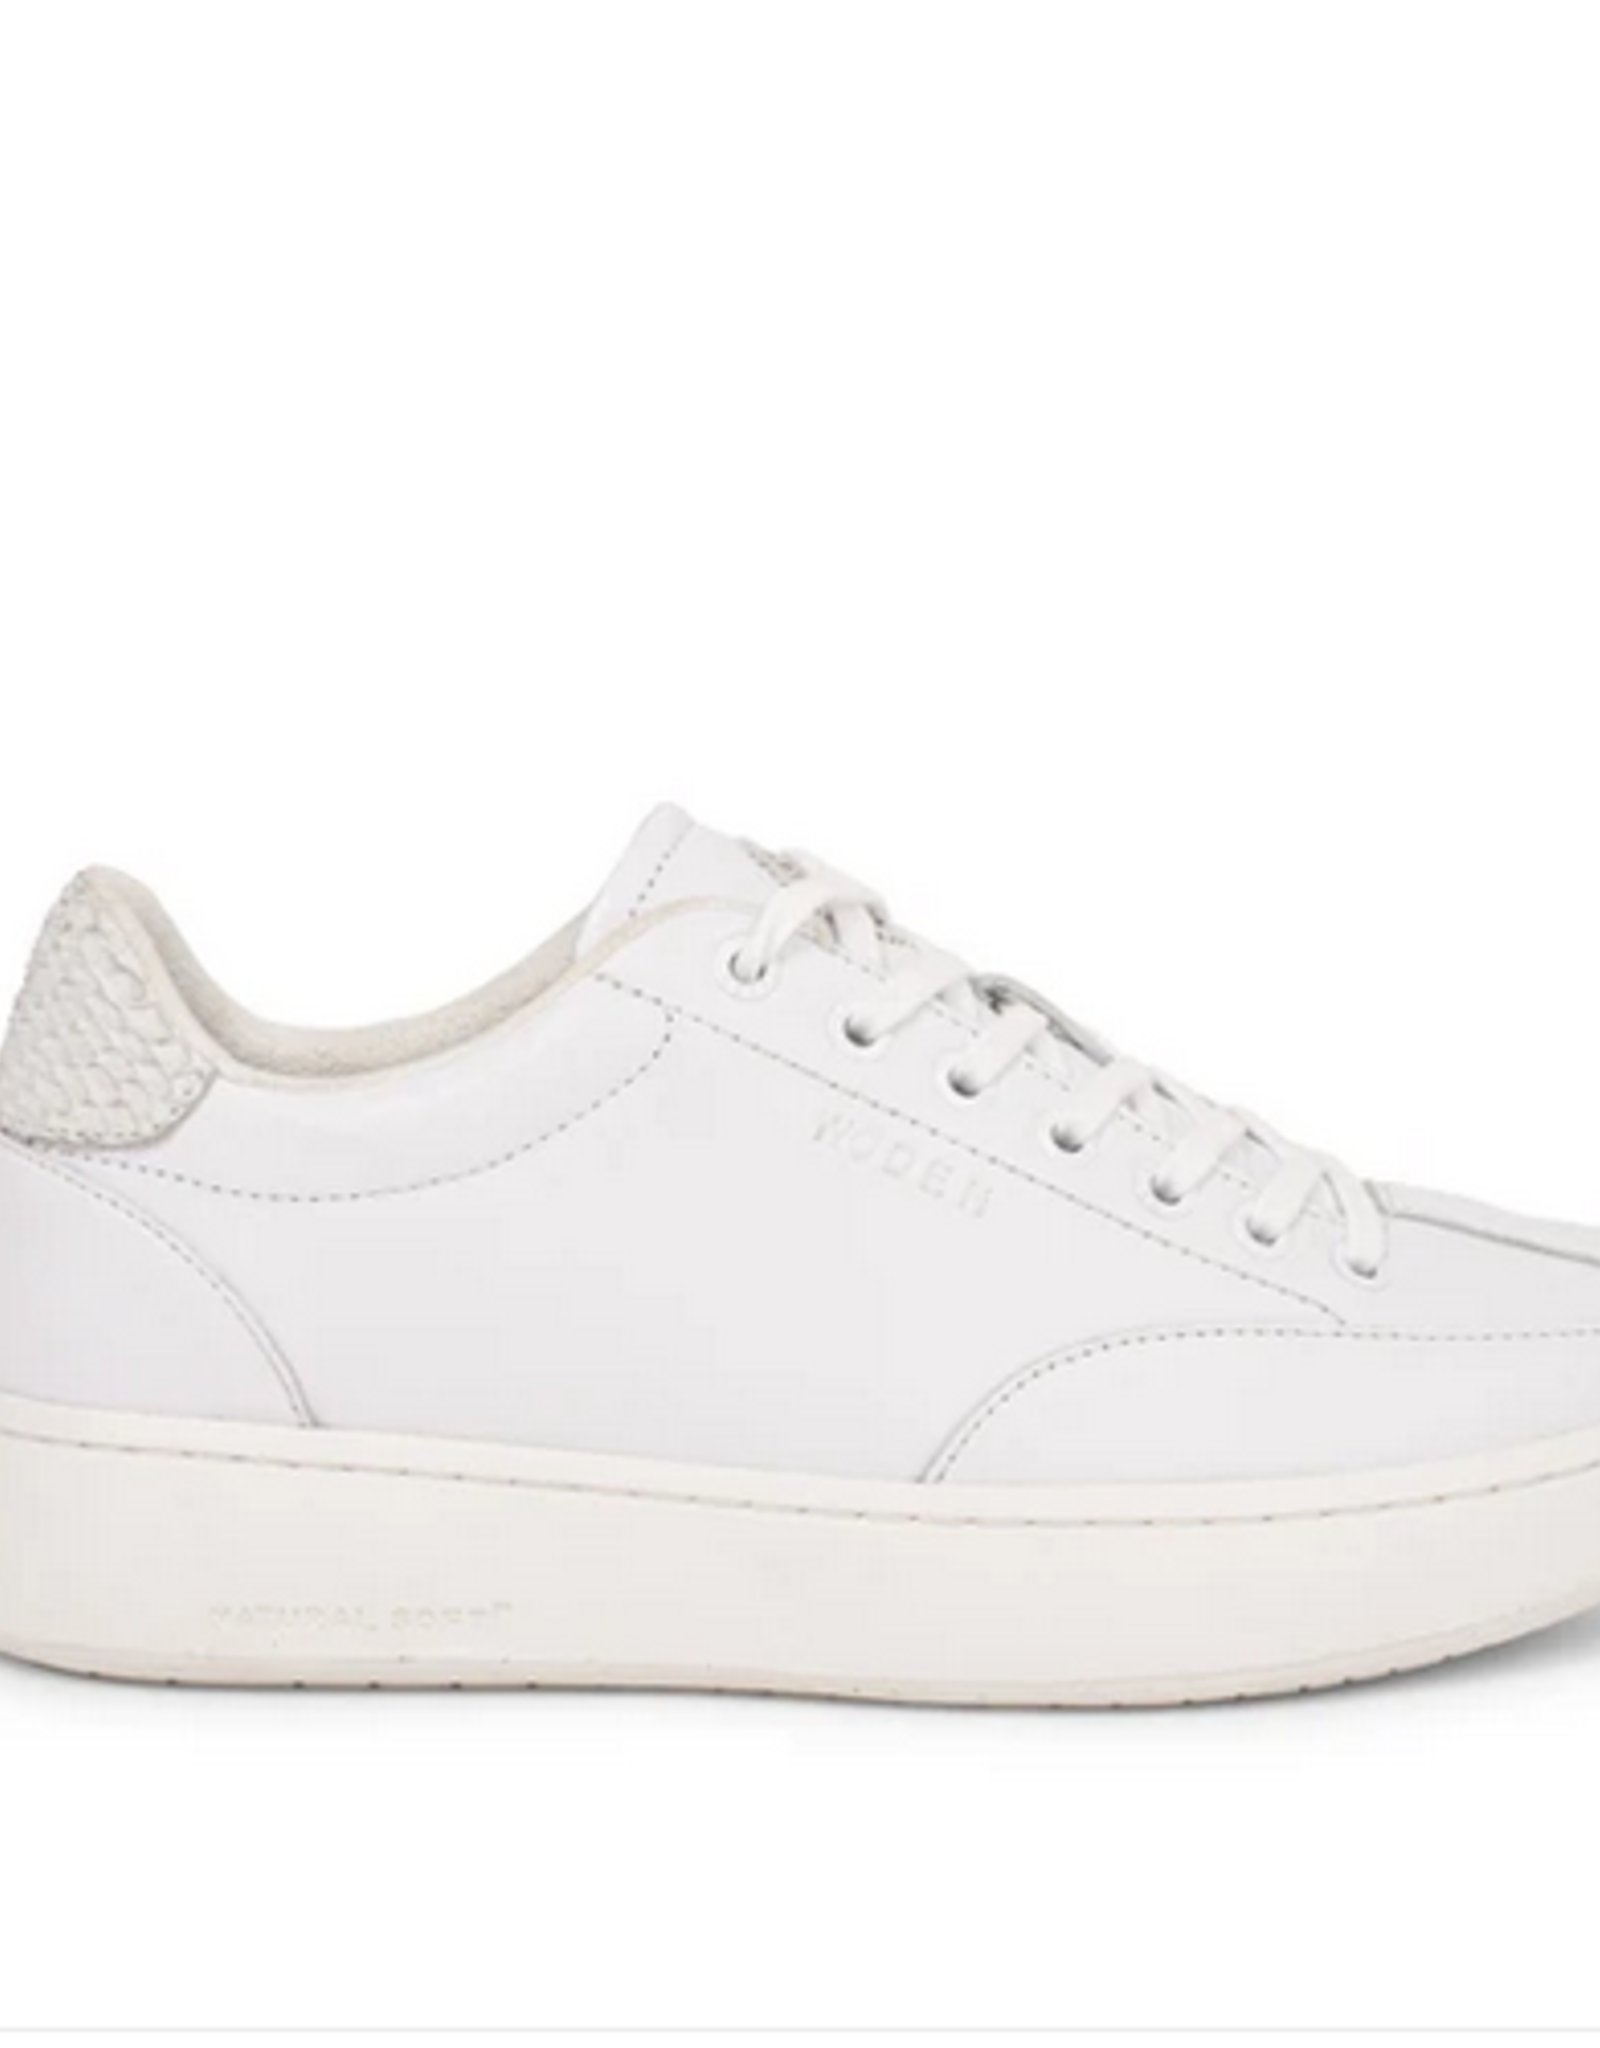 Woden Woden - Pernille Leather - Bright White